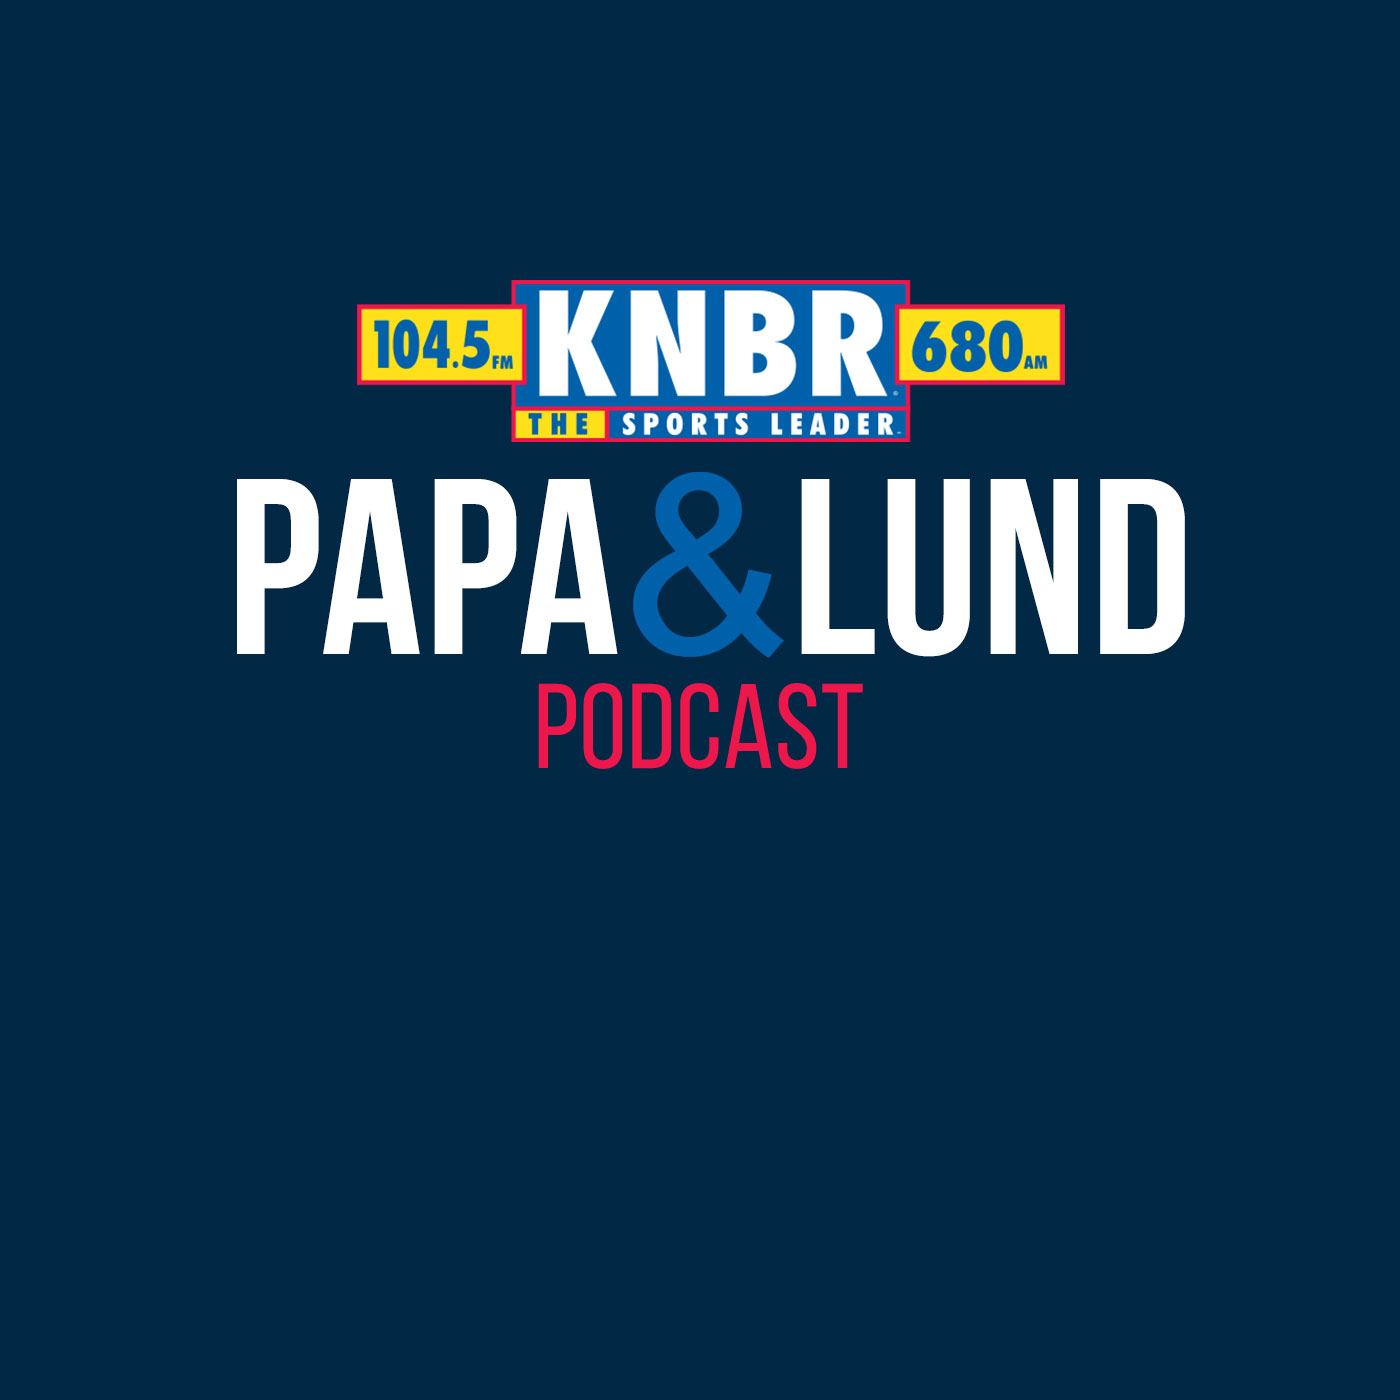 3-28 Marc Spears joins Papa & Lund: The Warriors should be concerned right now